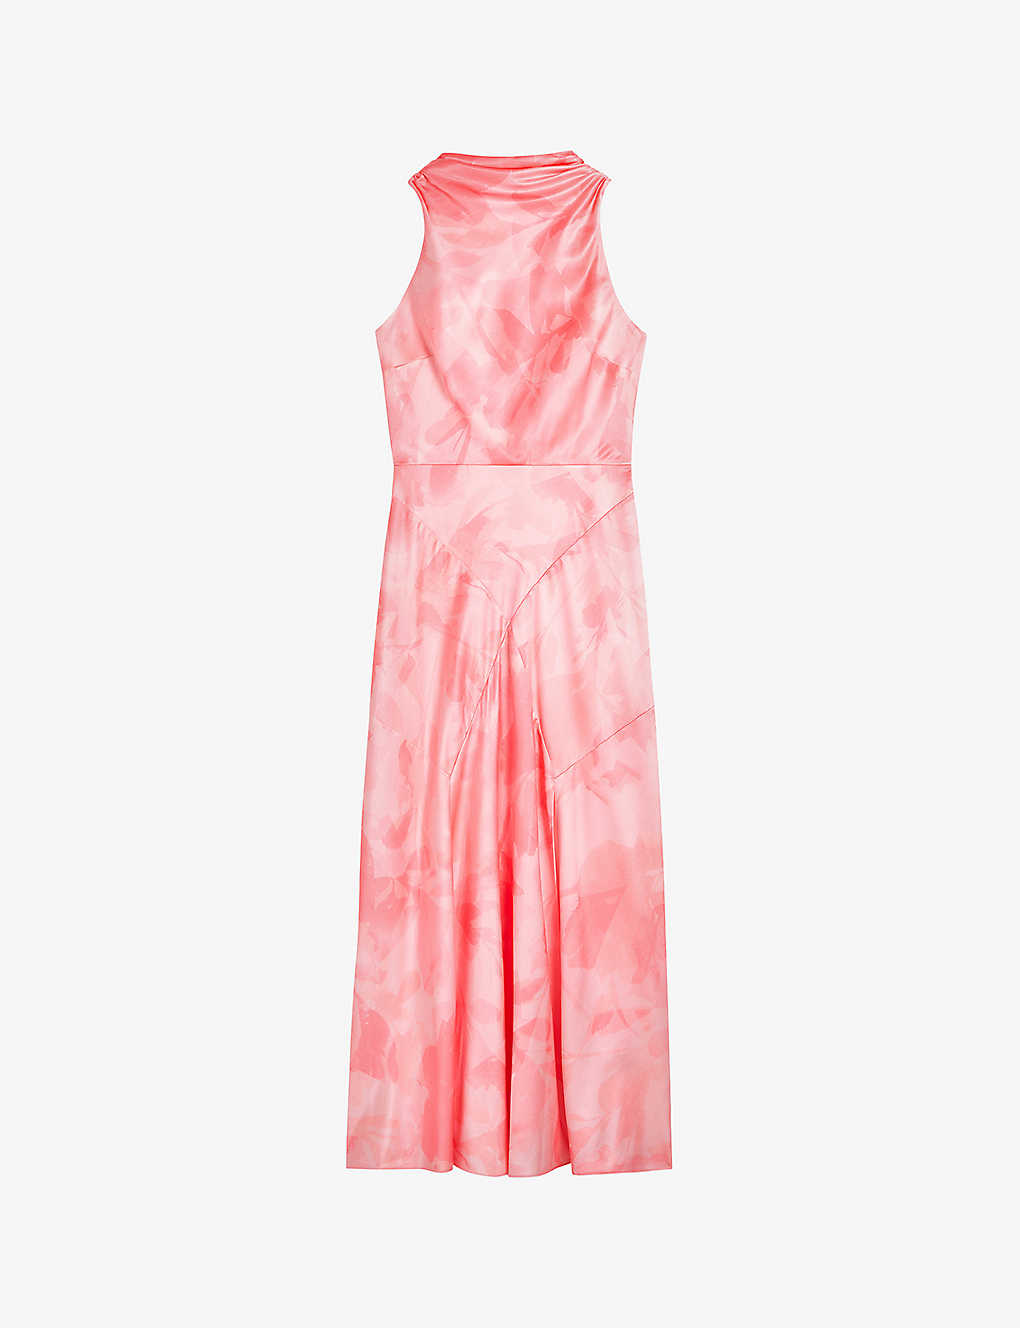 Shop Ted Baker Women's Coral Lilymay Floral-print Satin Midi Dress